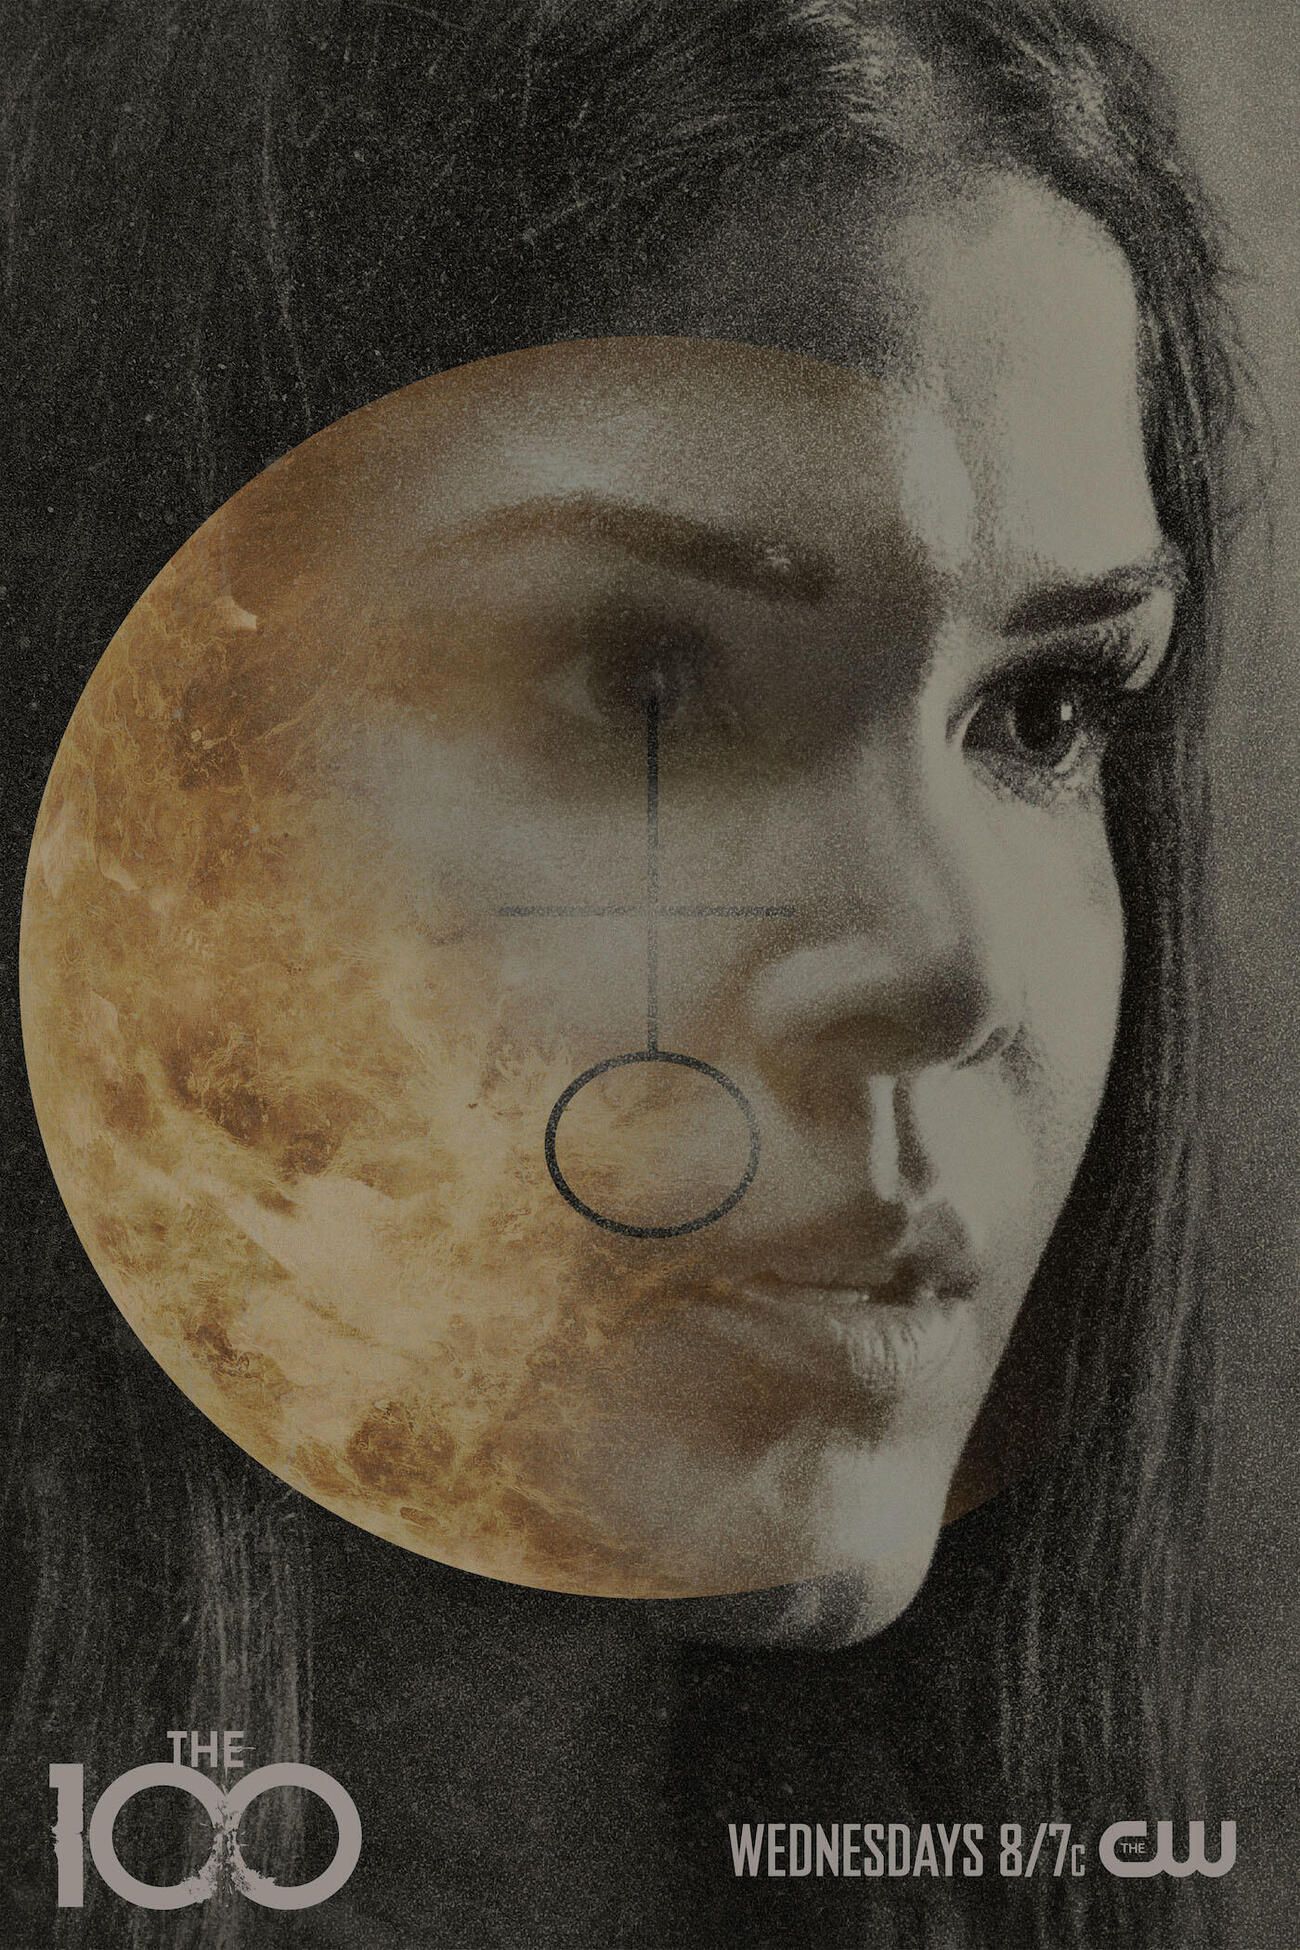 The 100 Season 7 Character Photo. TV Guide. The 100 poster, The Marie avgeropoulos